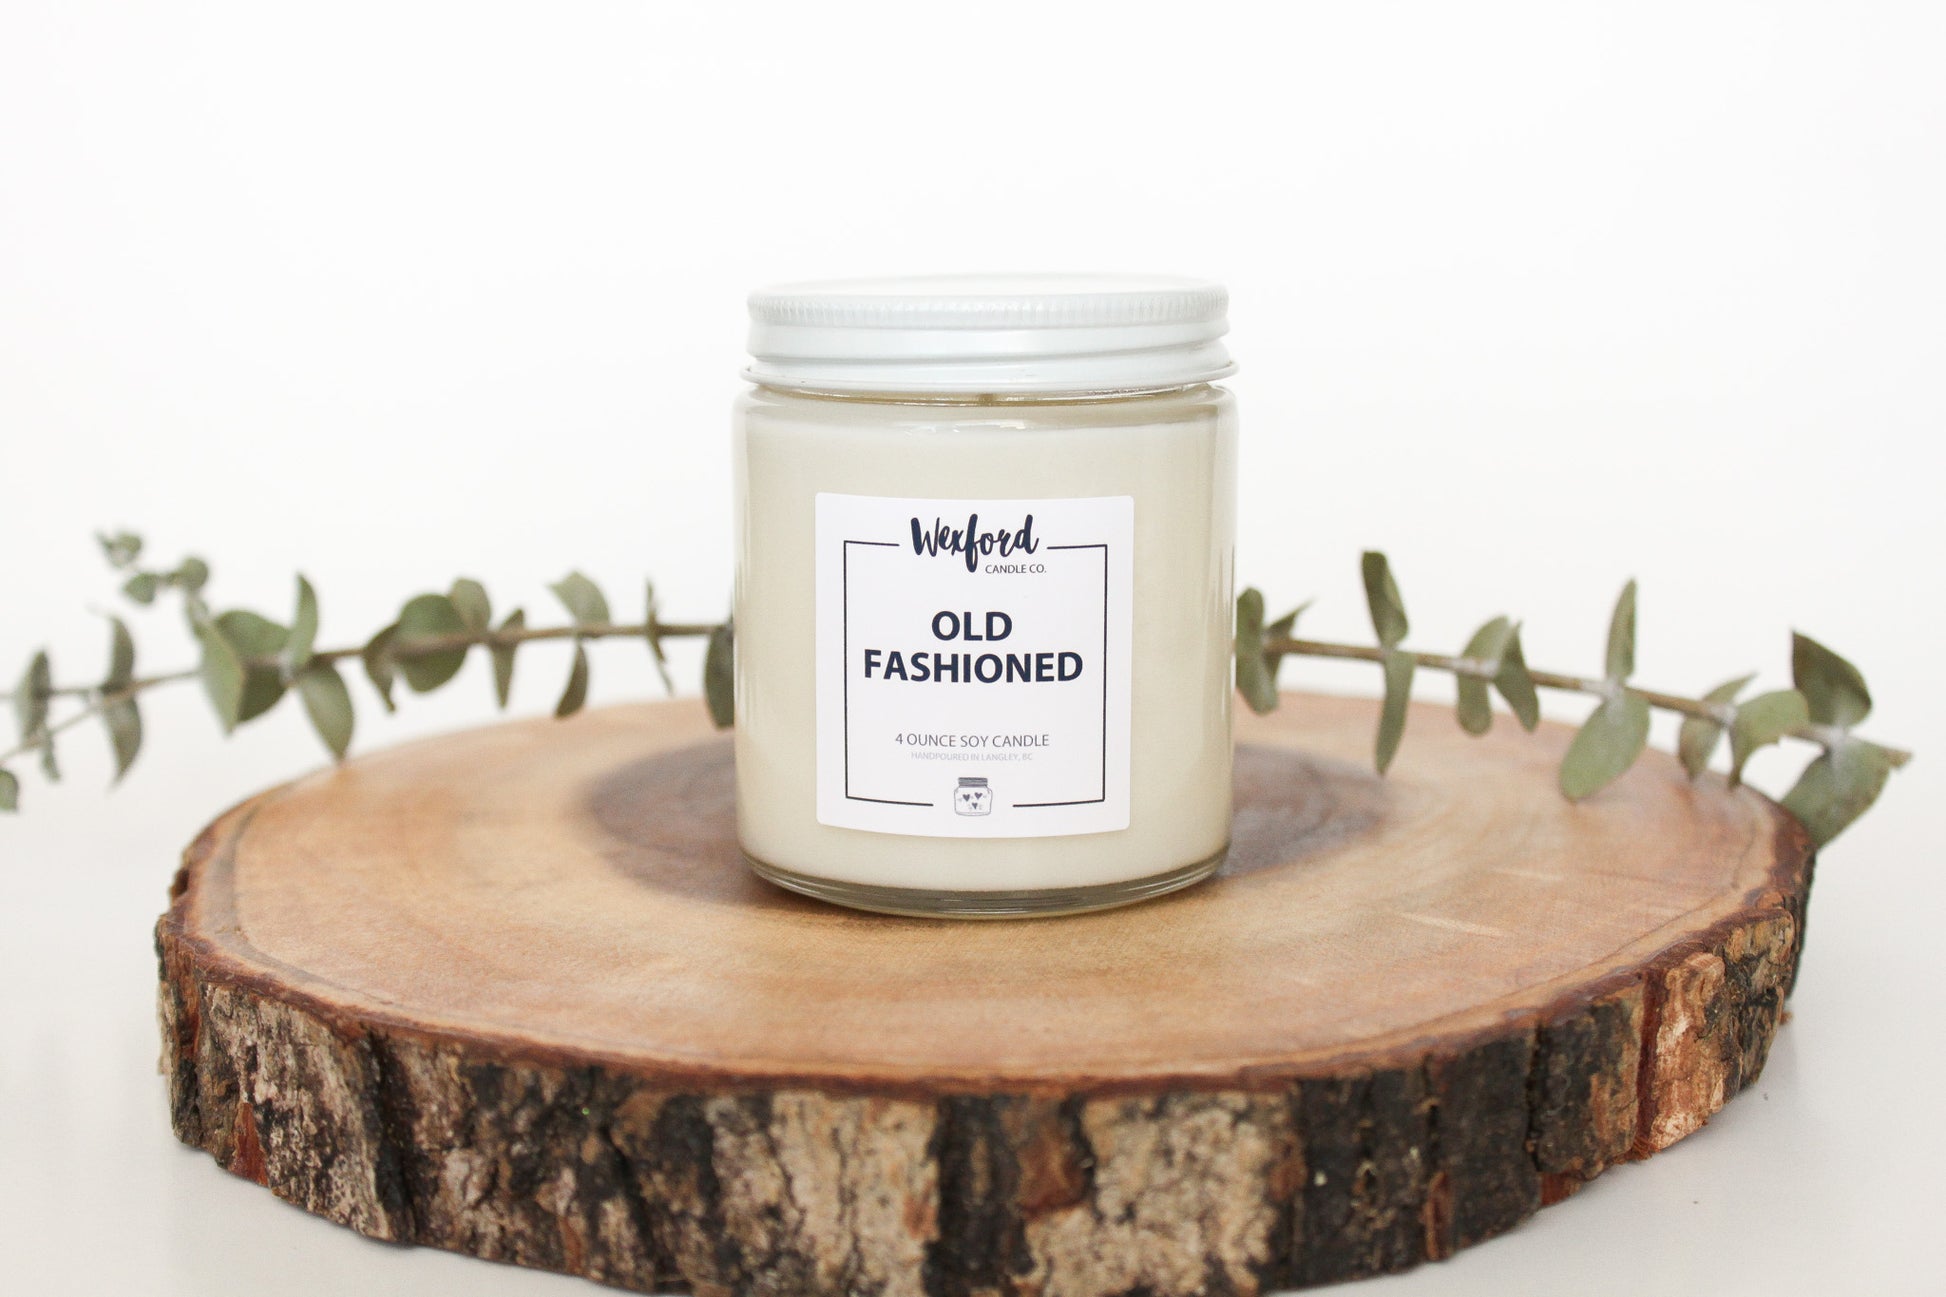 Old Fashioned Soy Candle - Wexford Candle Co.